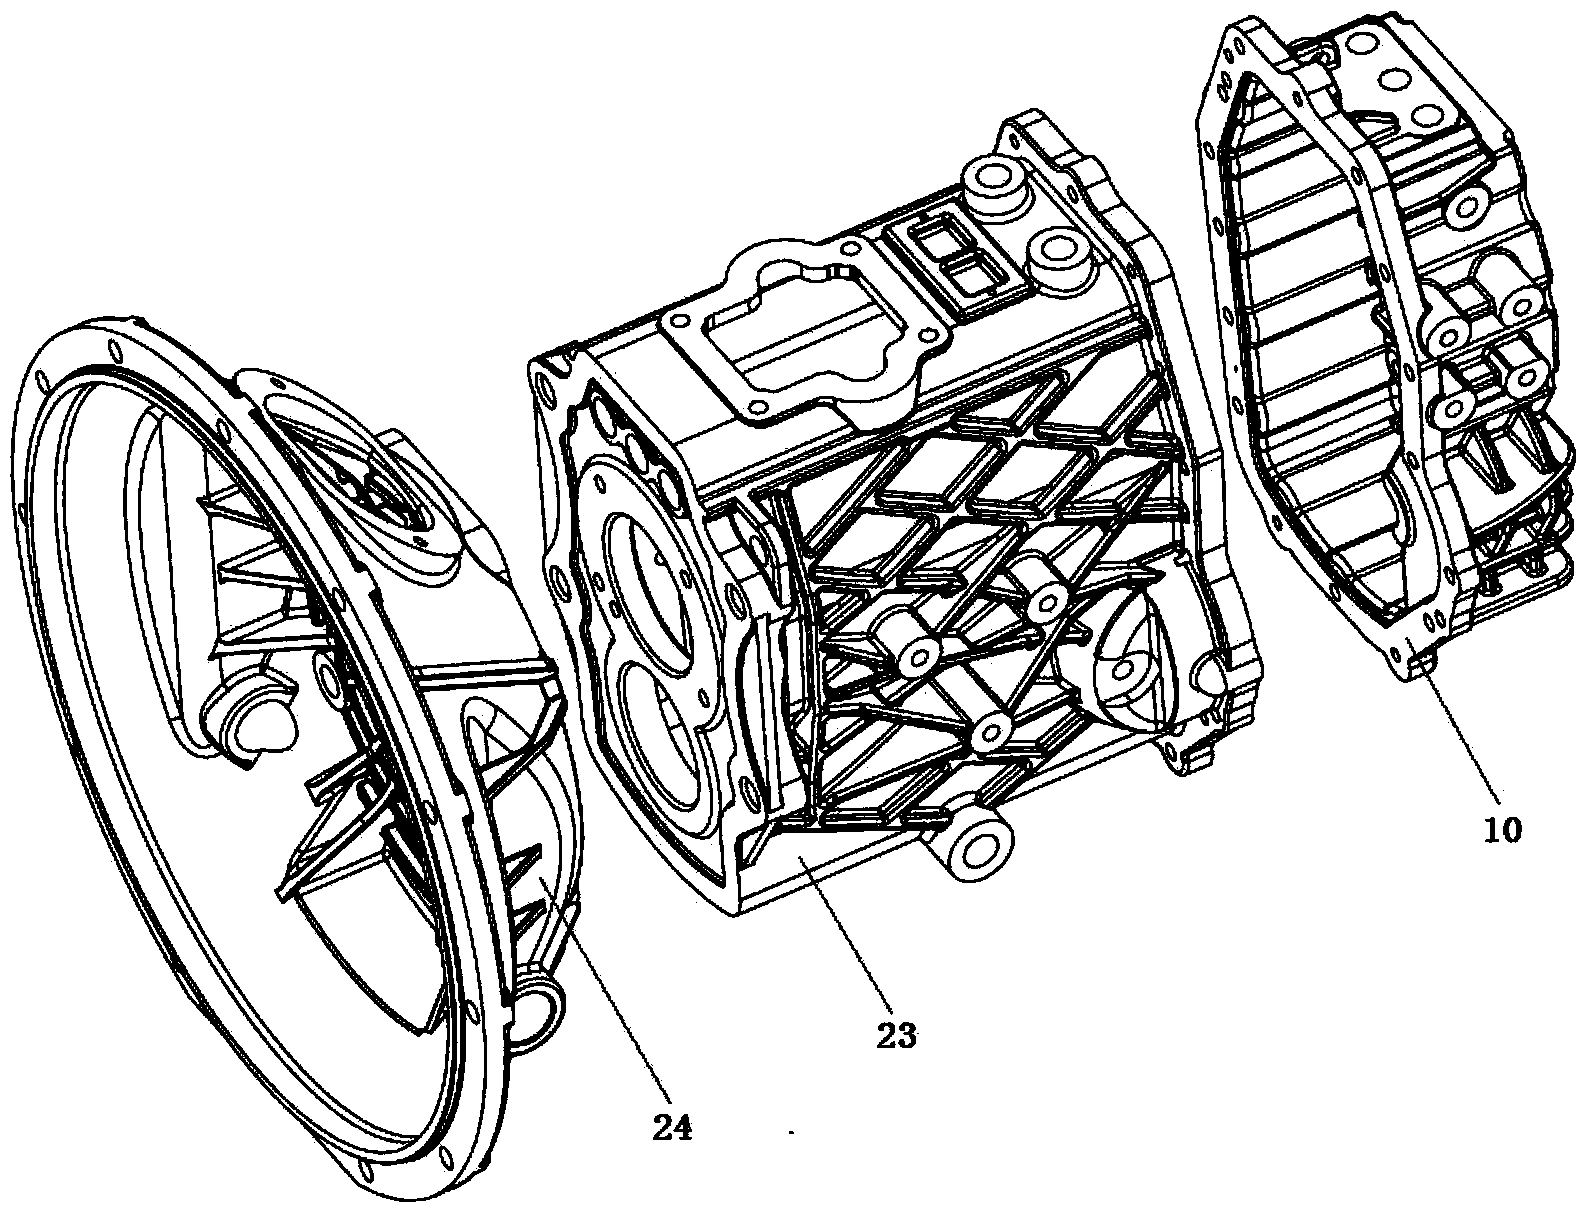 Five-shift car gearbox